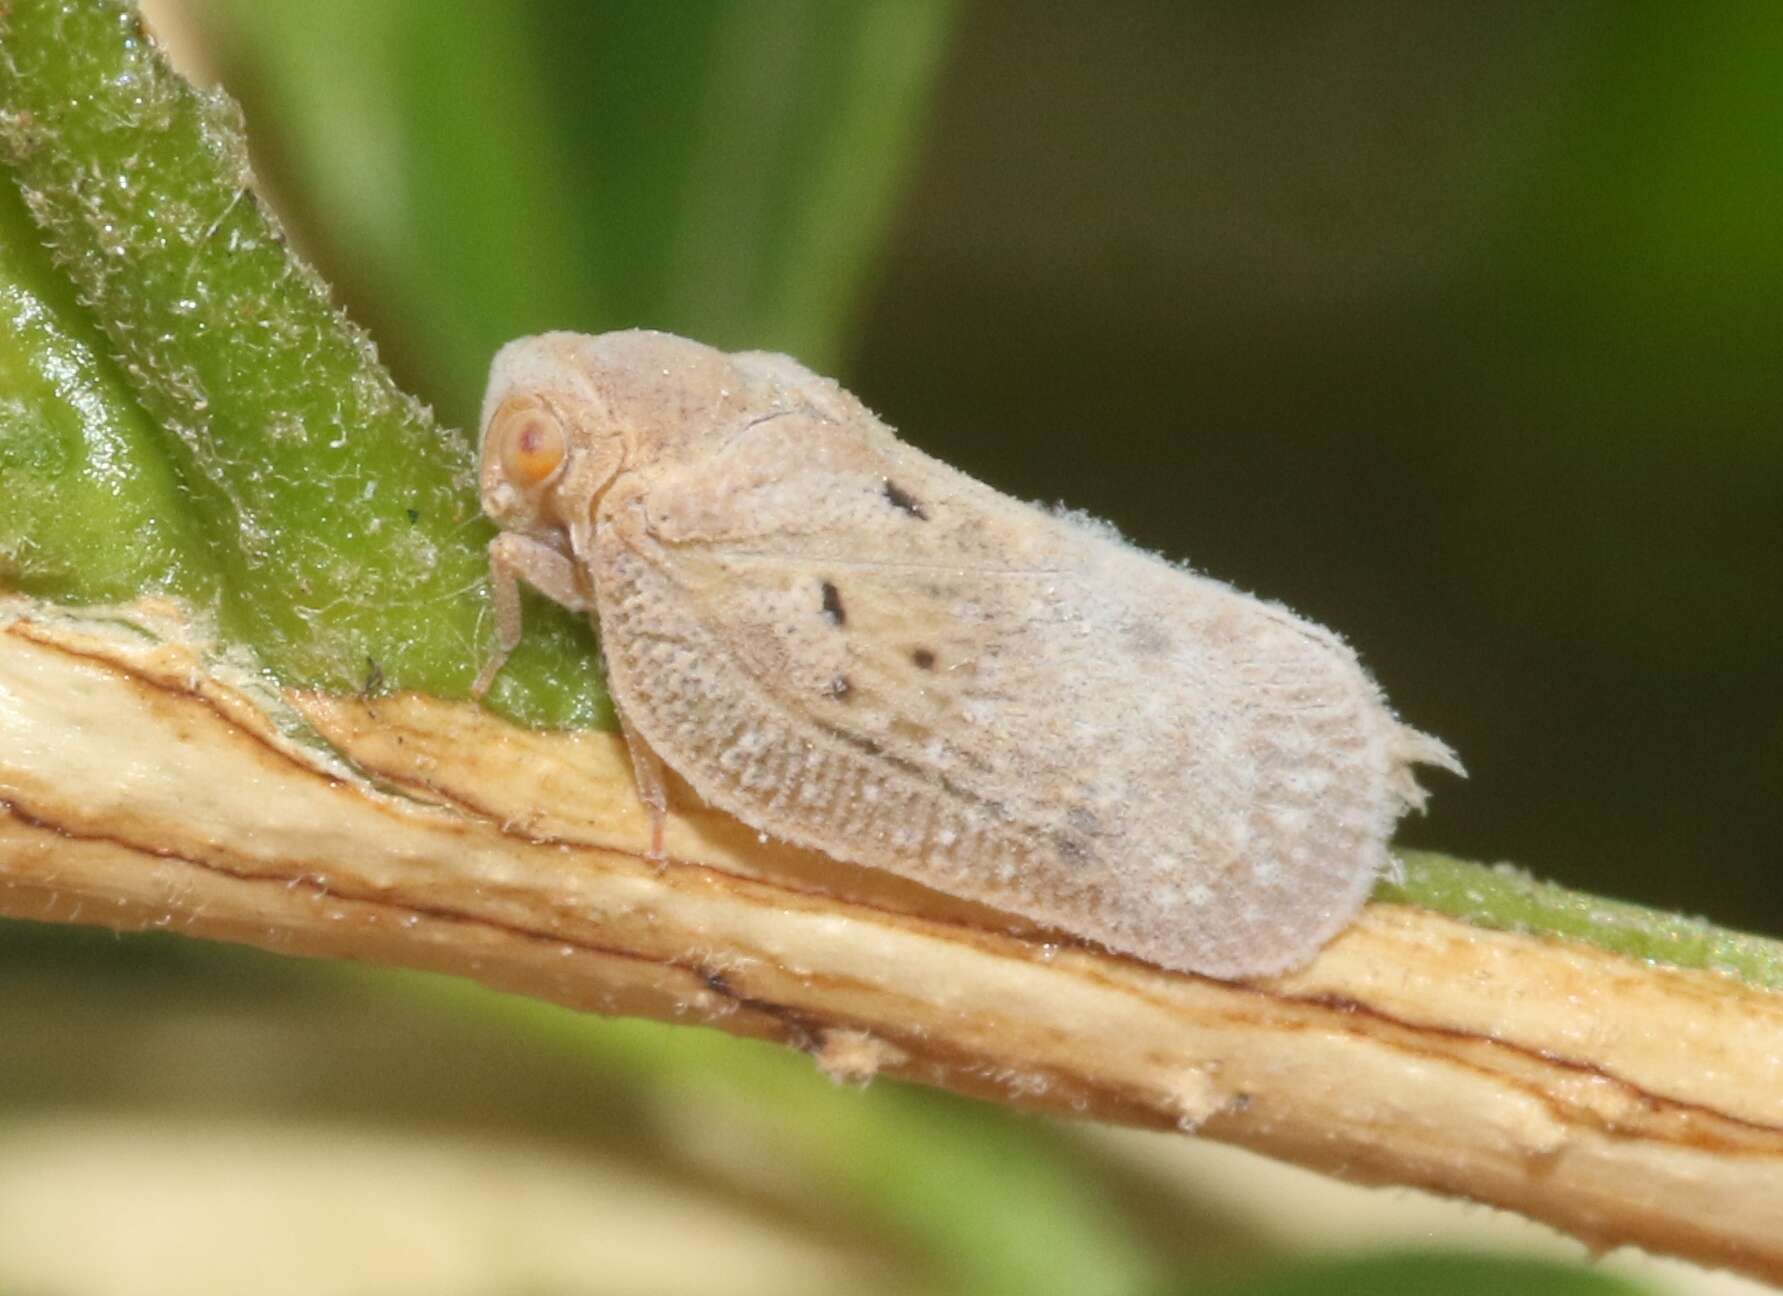 Image of Puerto rican planthopper